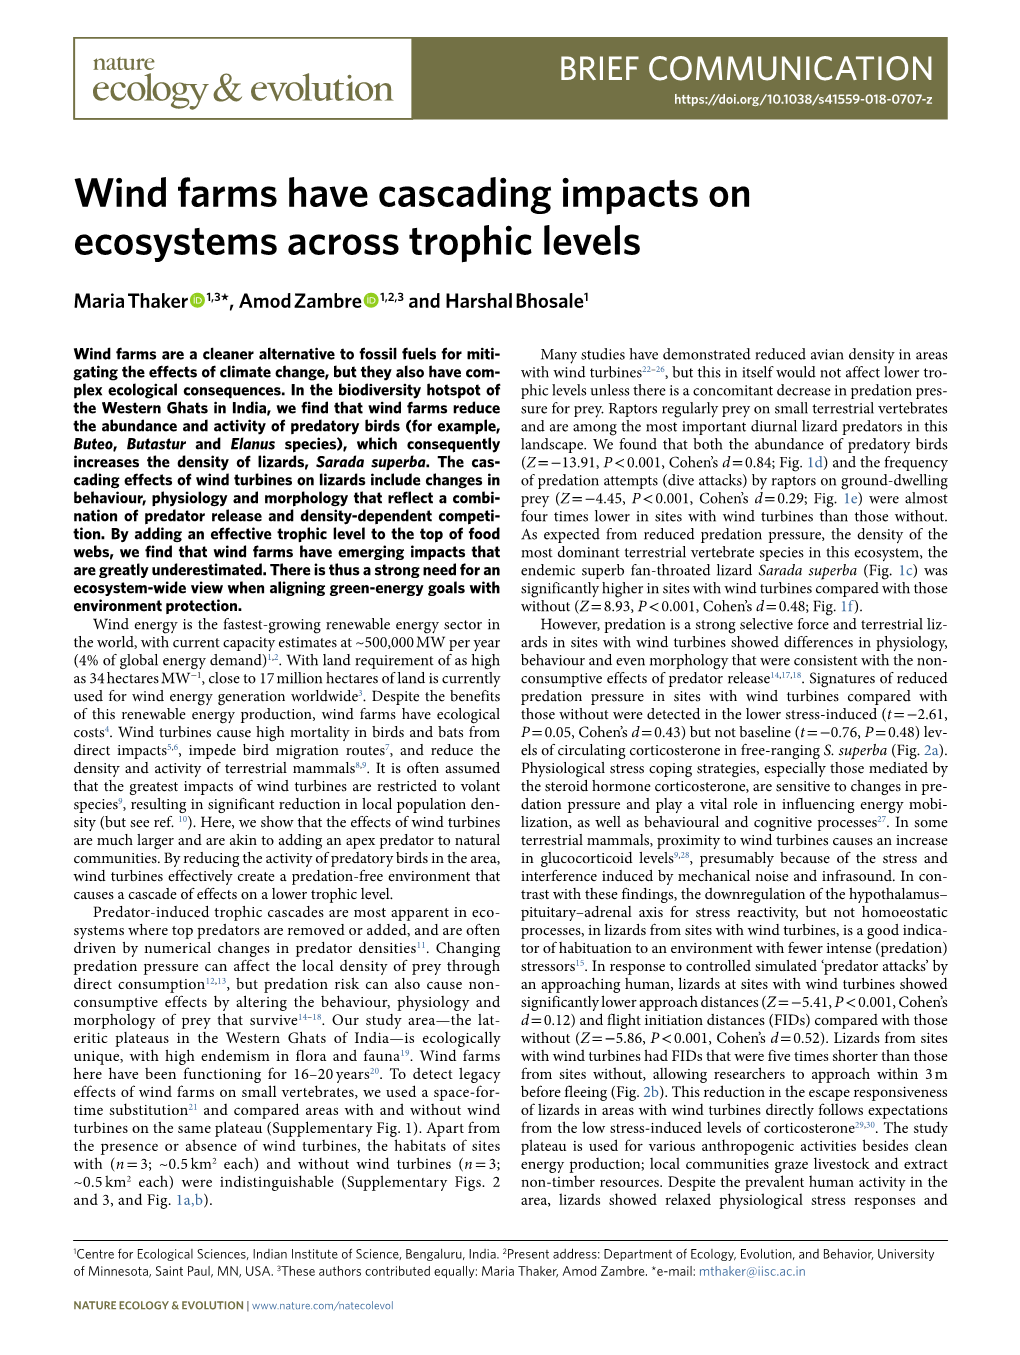 Wind Farms Have Cascading Impacts on Ecosystems Across Trophic Levels